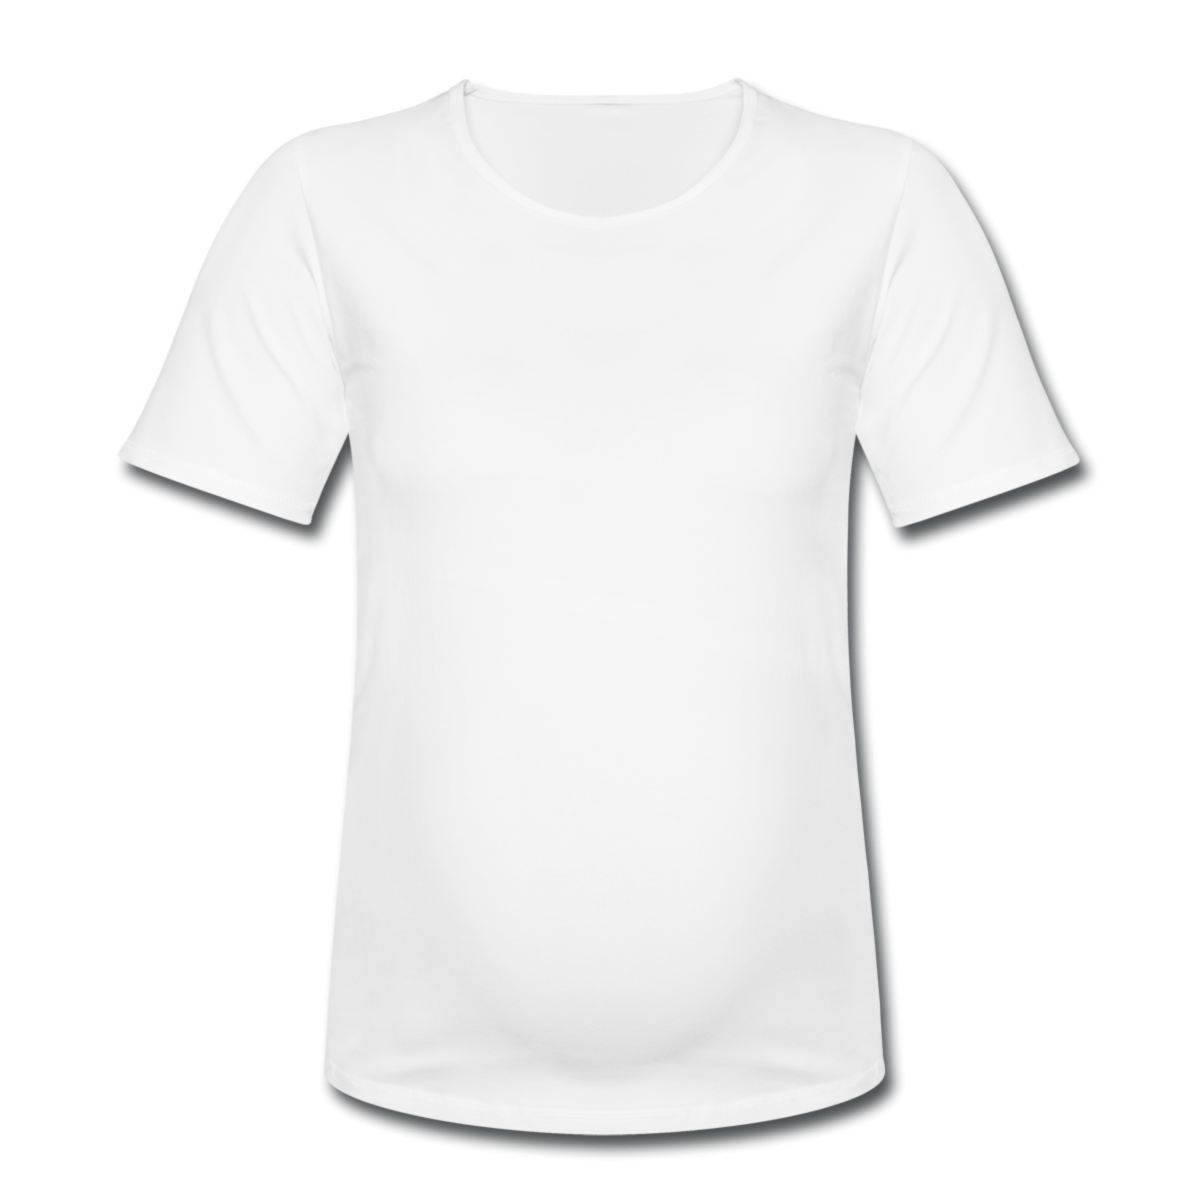 Displaying <19> Images For - Blank White T Shirt Front And Back.